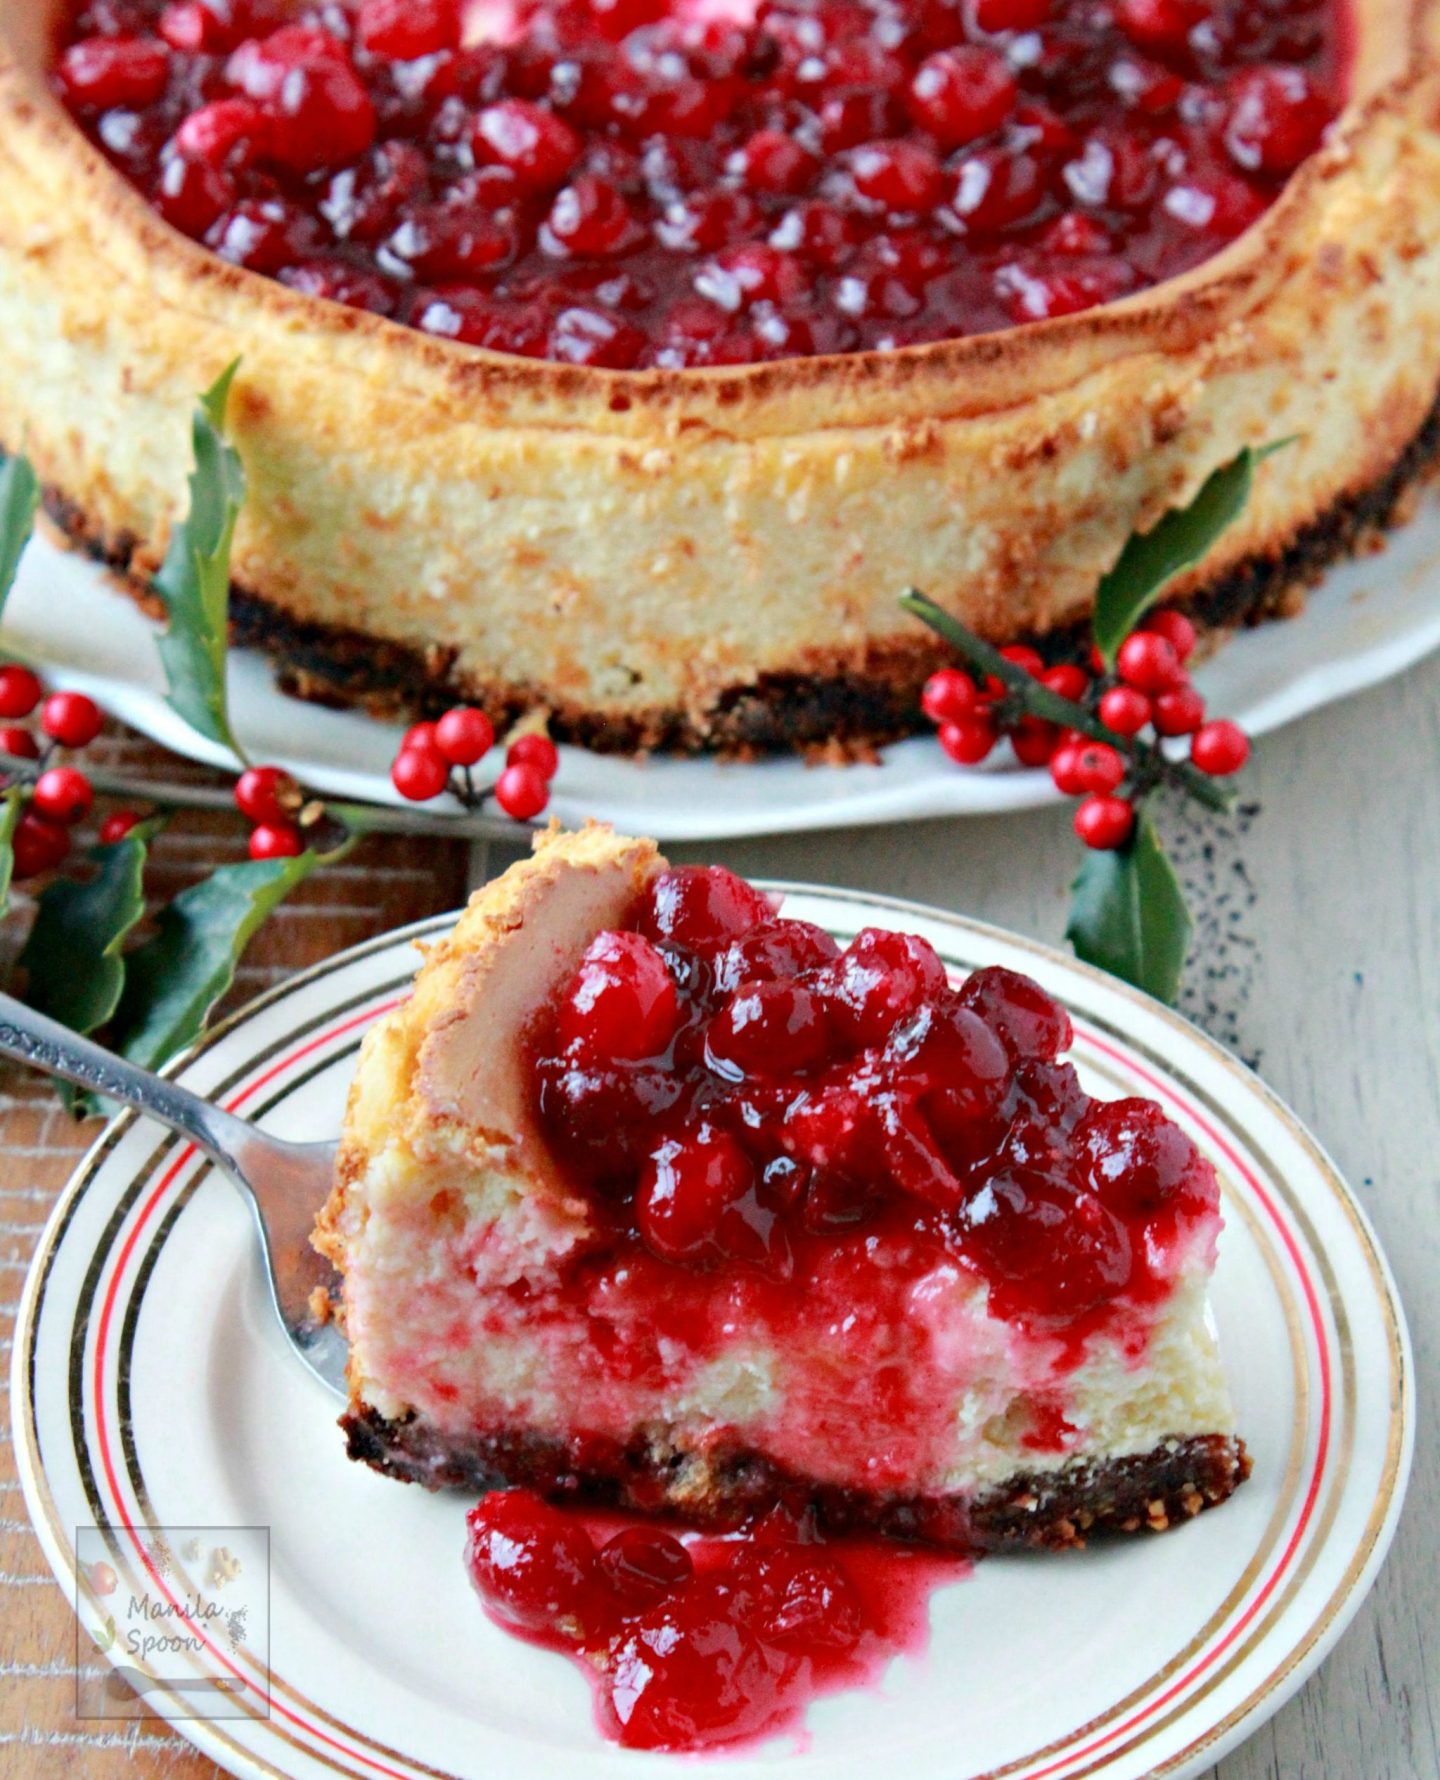 A deliciously creamy holiday cheesecake topped with a luscious sweet-tangy and perfectly spiced cranberry sauce. It is completely gluten-free so it's perfect for those on a wheat-free diet!